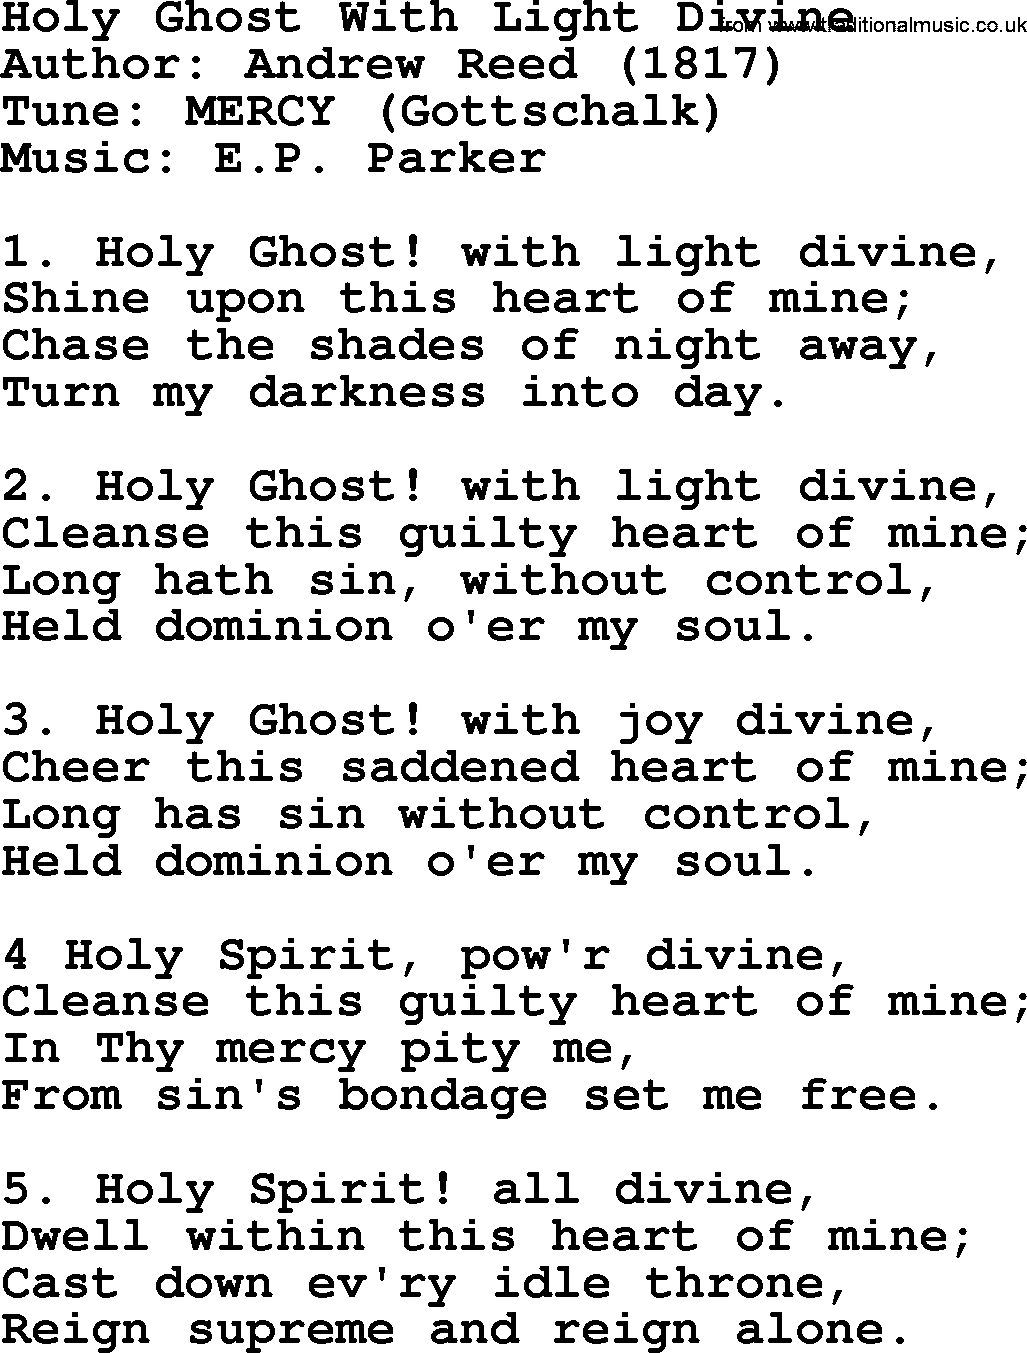 A collection of 500+ most sung Christian church hymns and songs, title: Holy Ghost With Light Divine-A. Reed, lyrics, PPTX and PDF